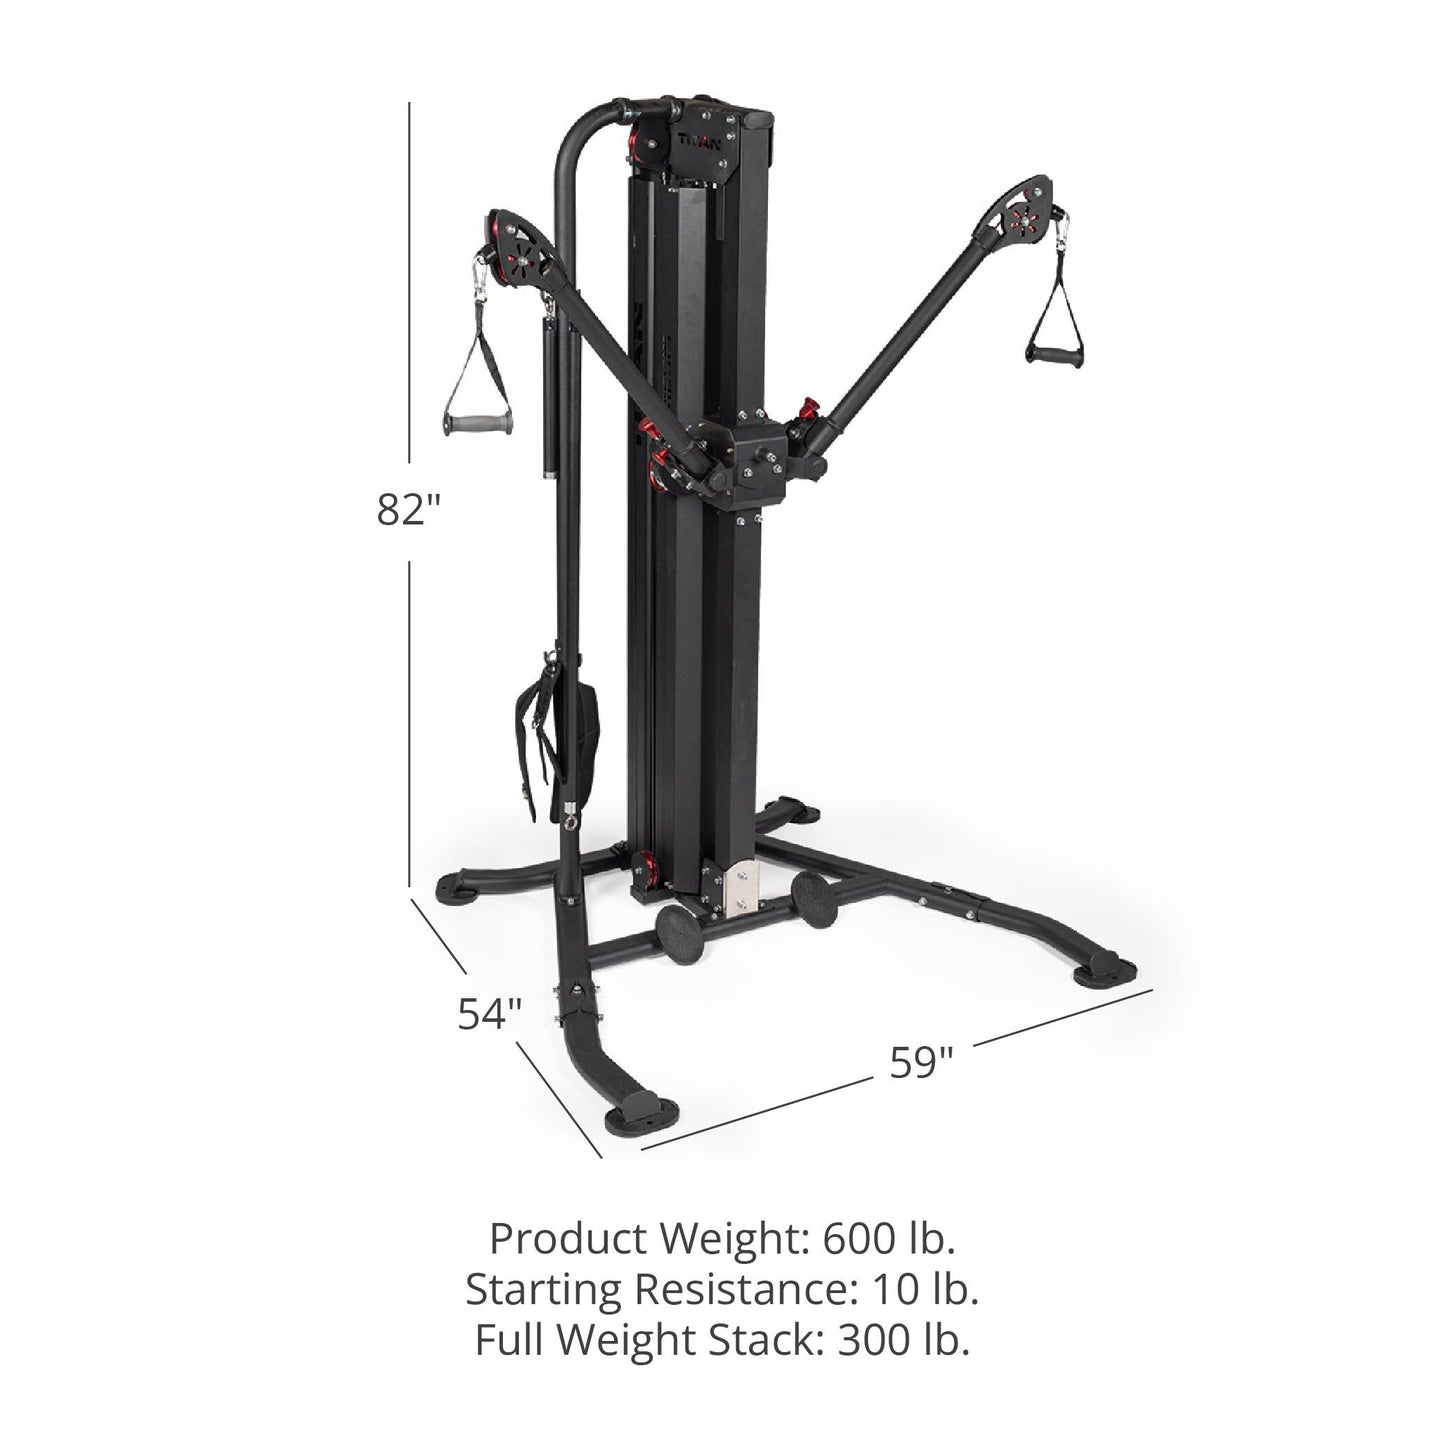 Nemesis™ 300 LB Single Stack Functional Trainer - view 14